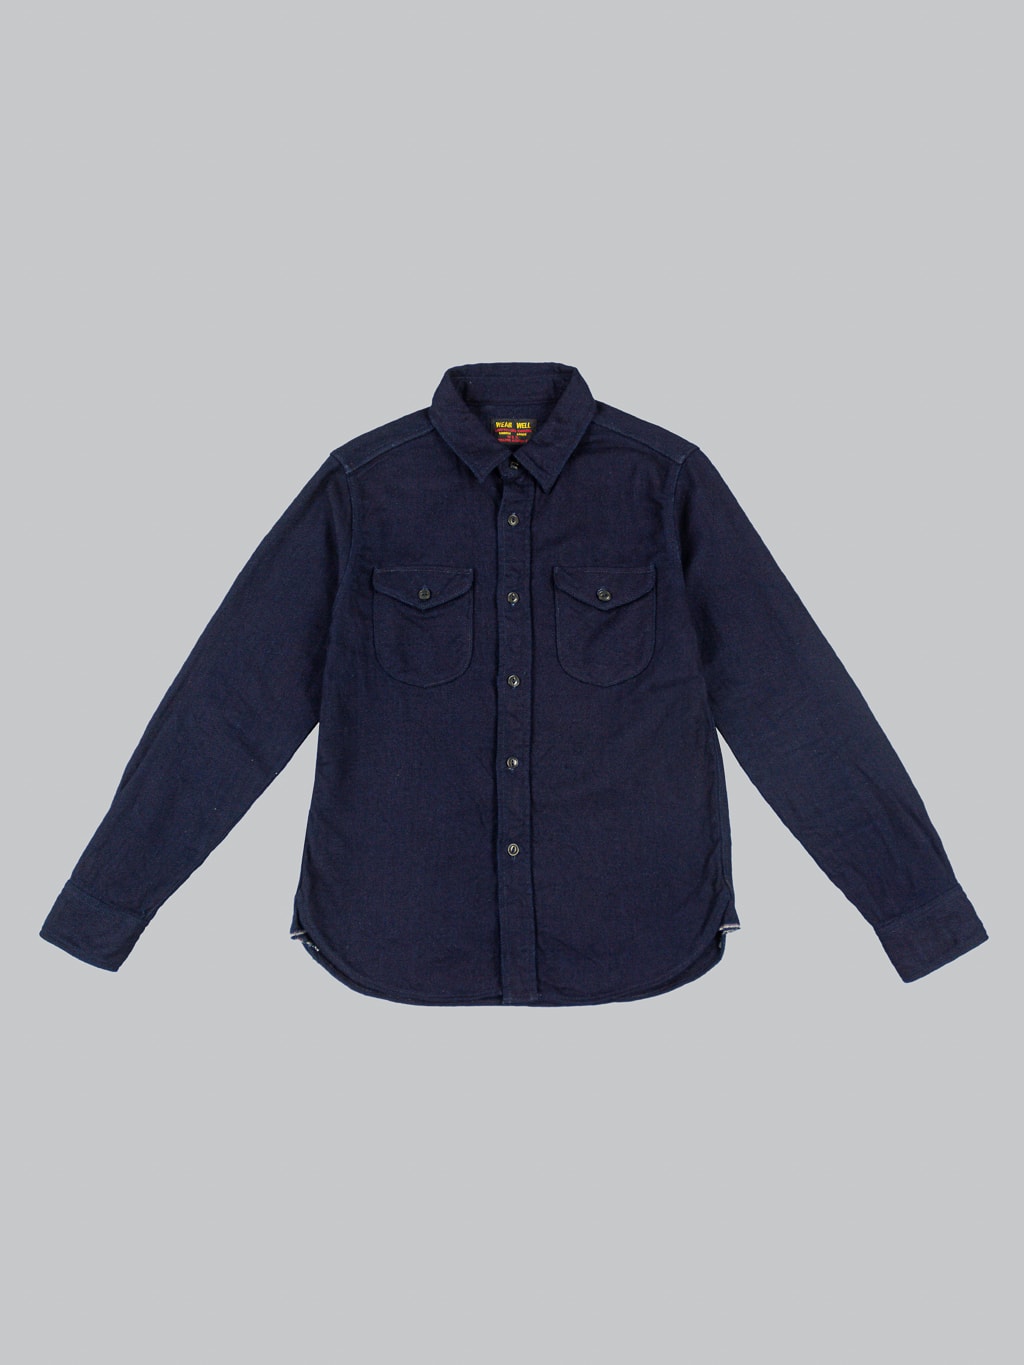 UES Indigo Heavy Selvedge Flannel Shirt front view